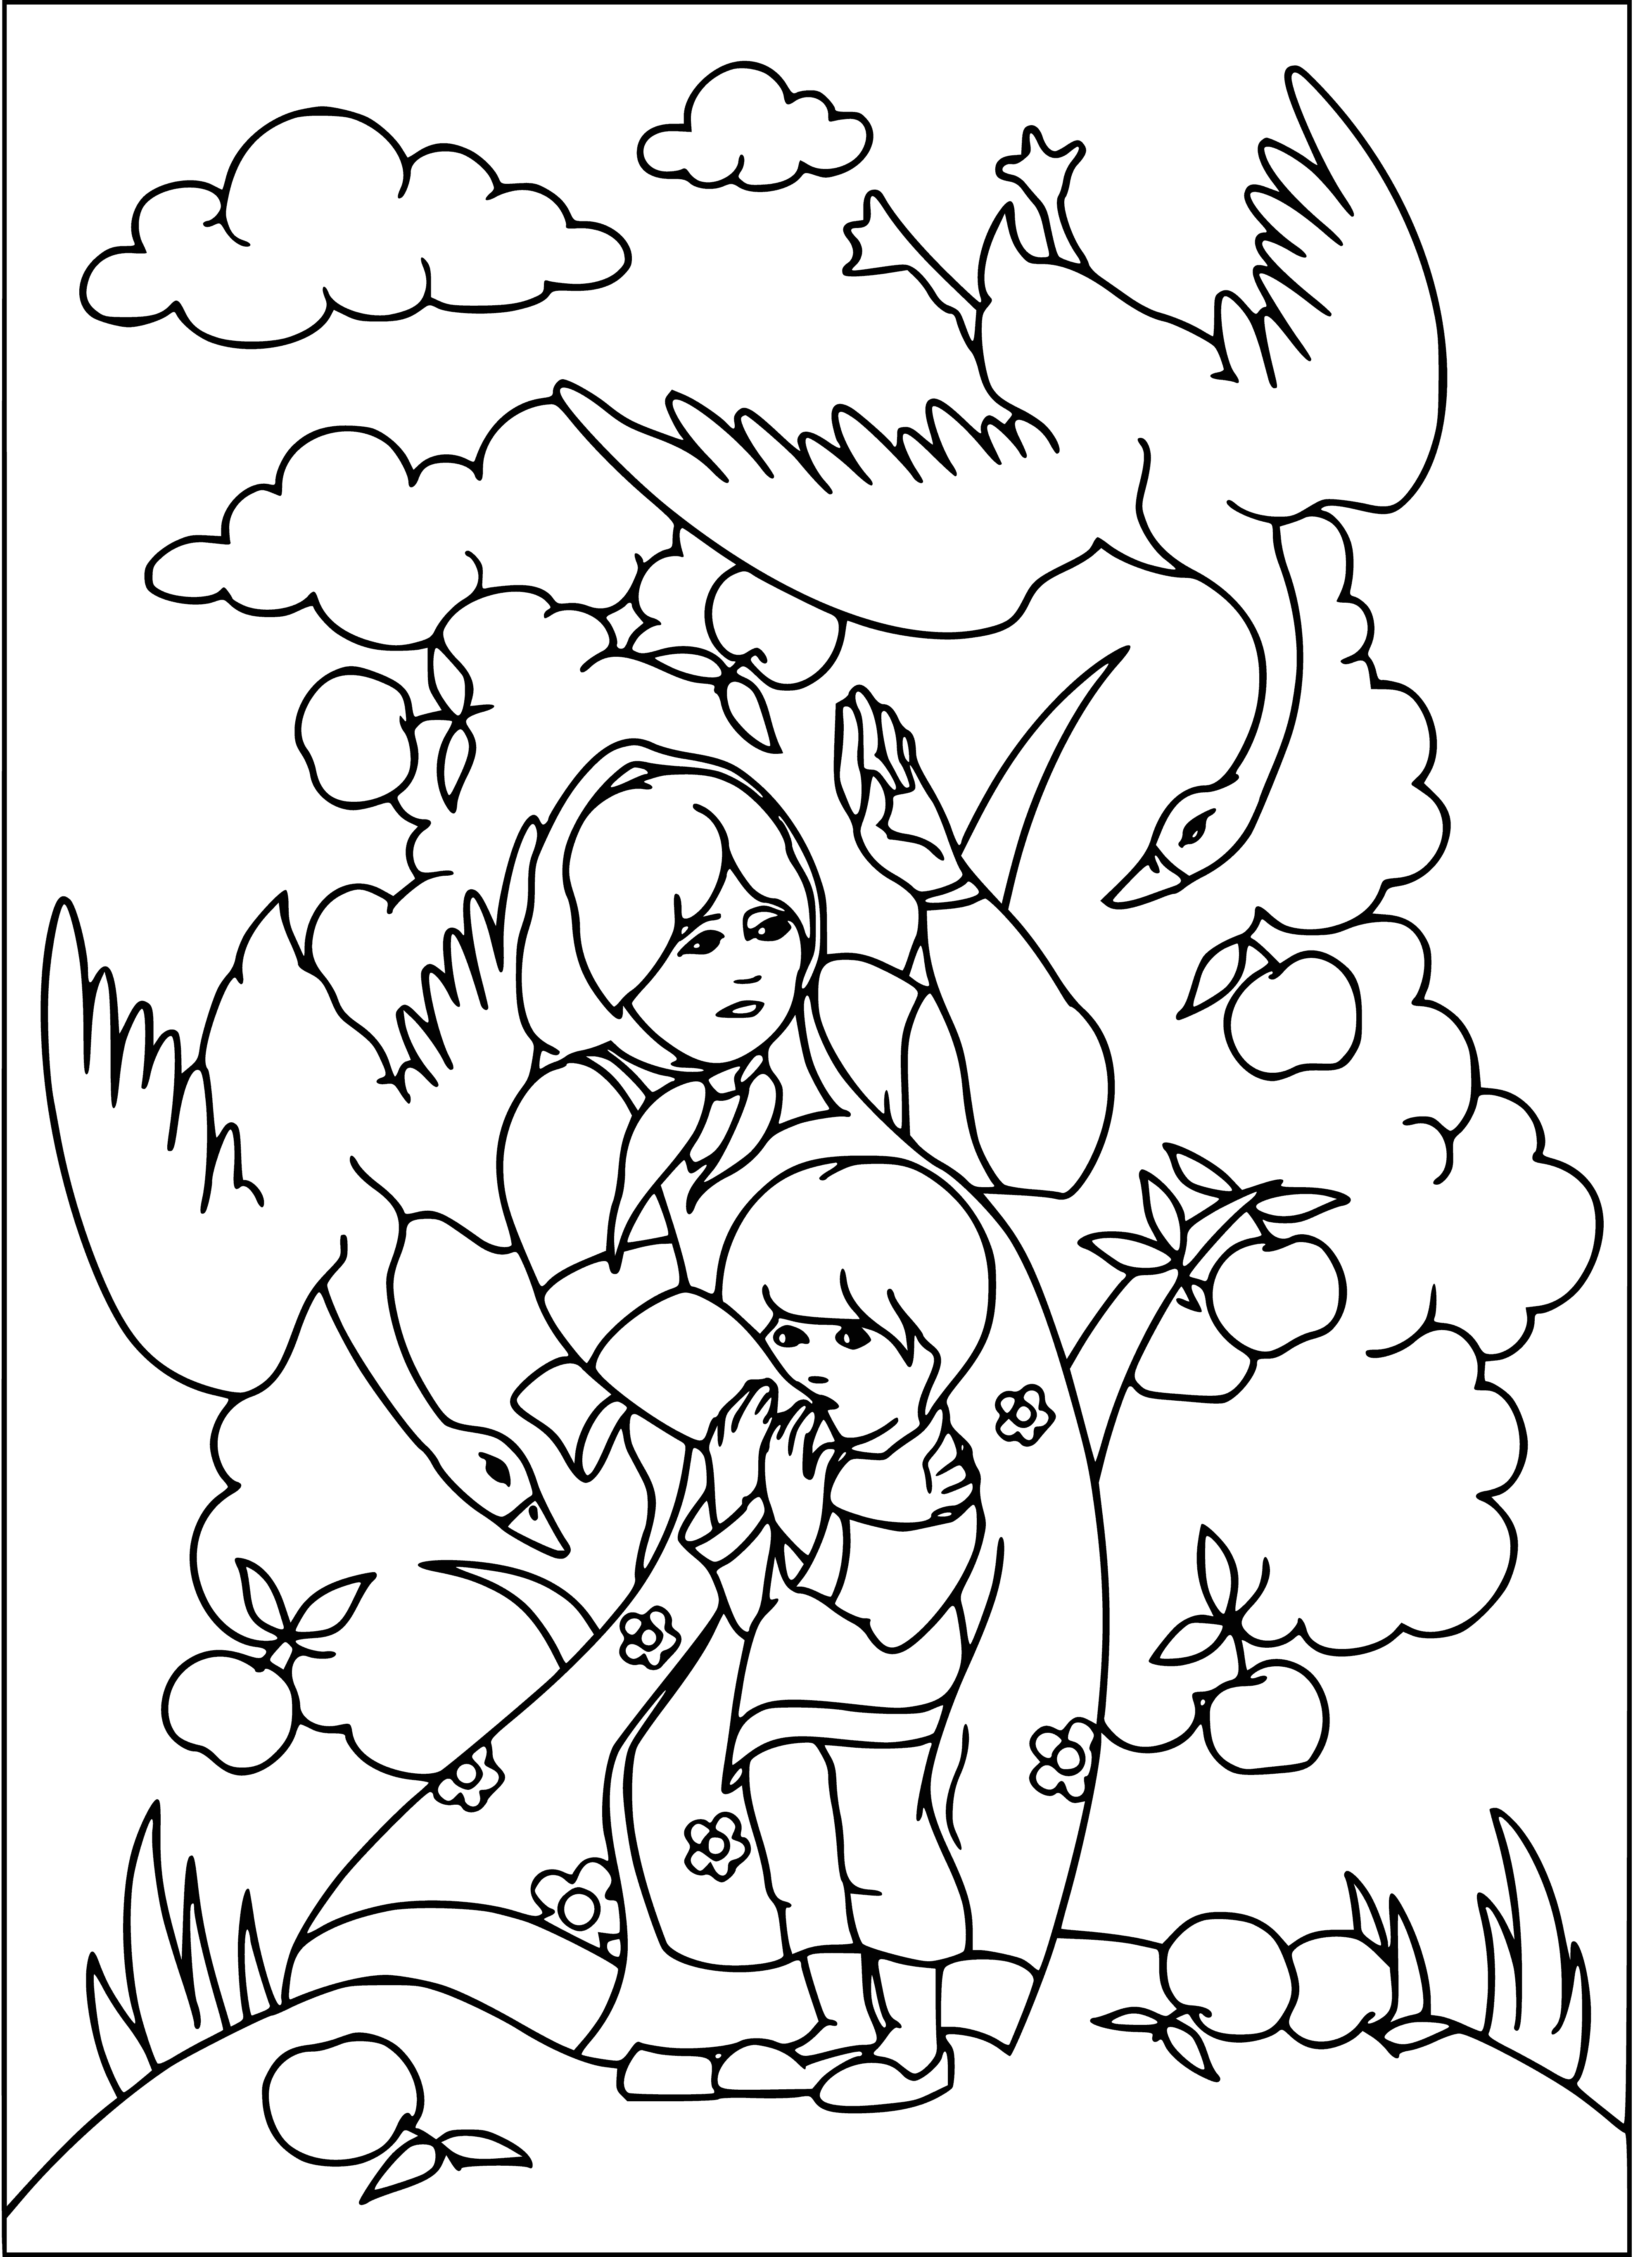 The apple tree sheltered the children coloring page